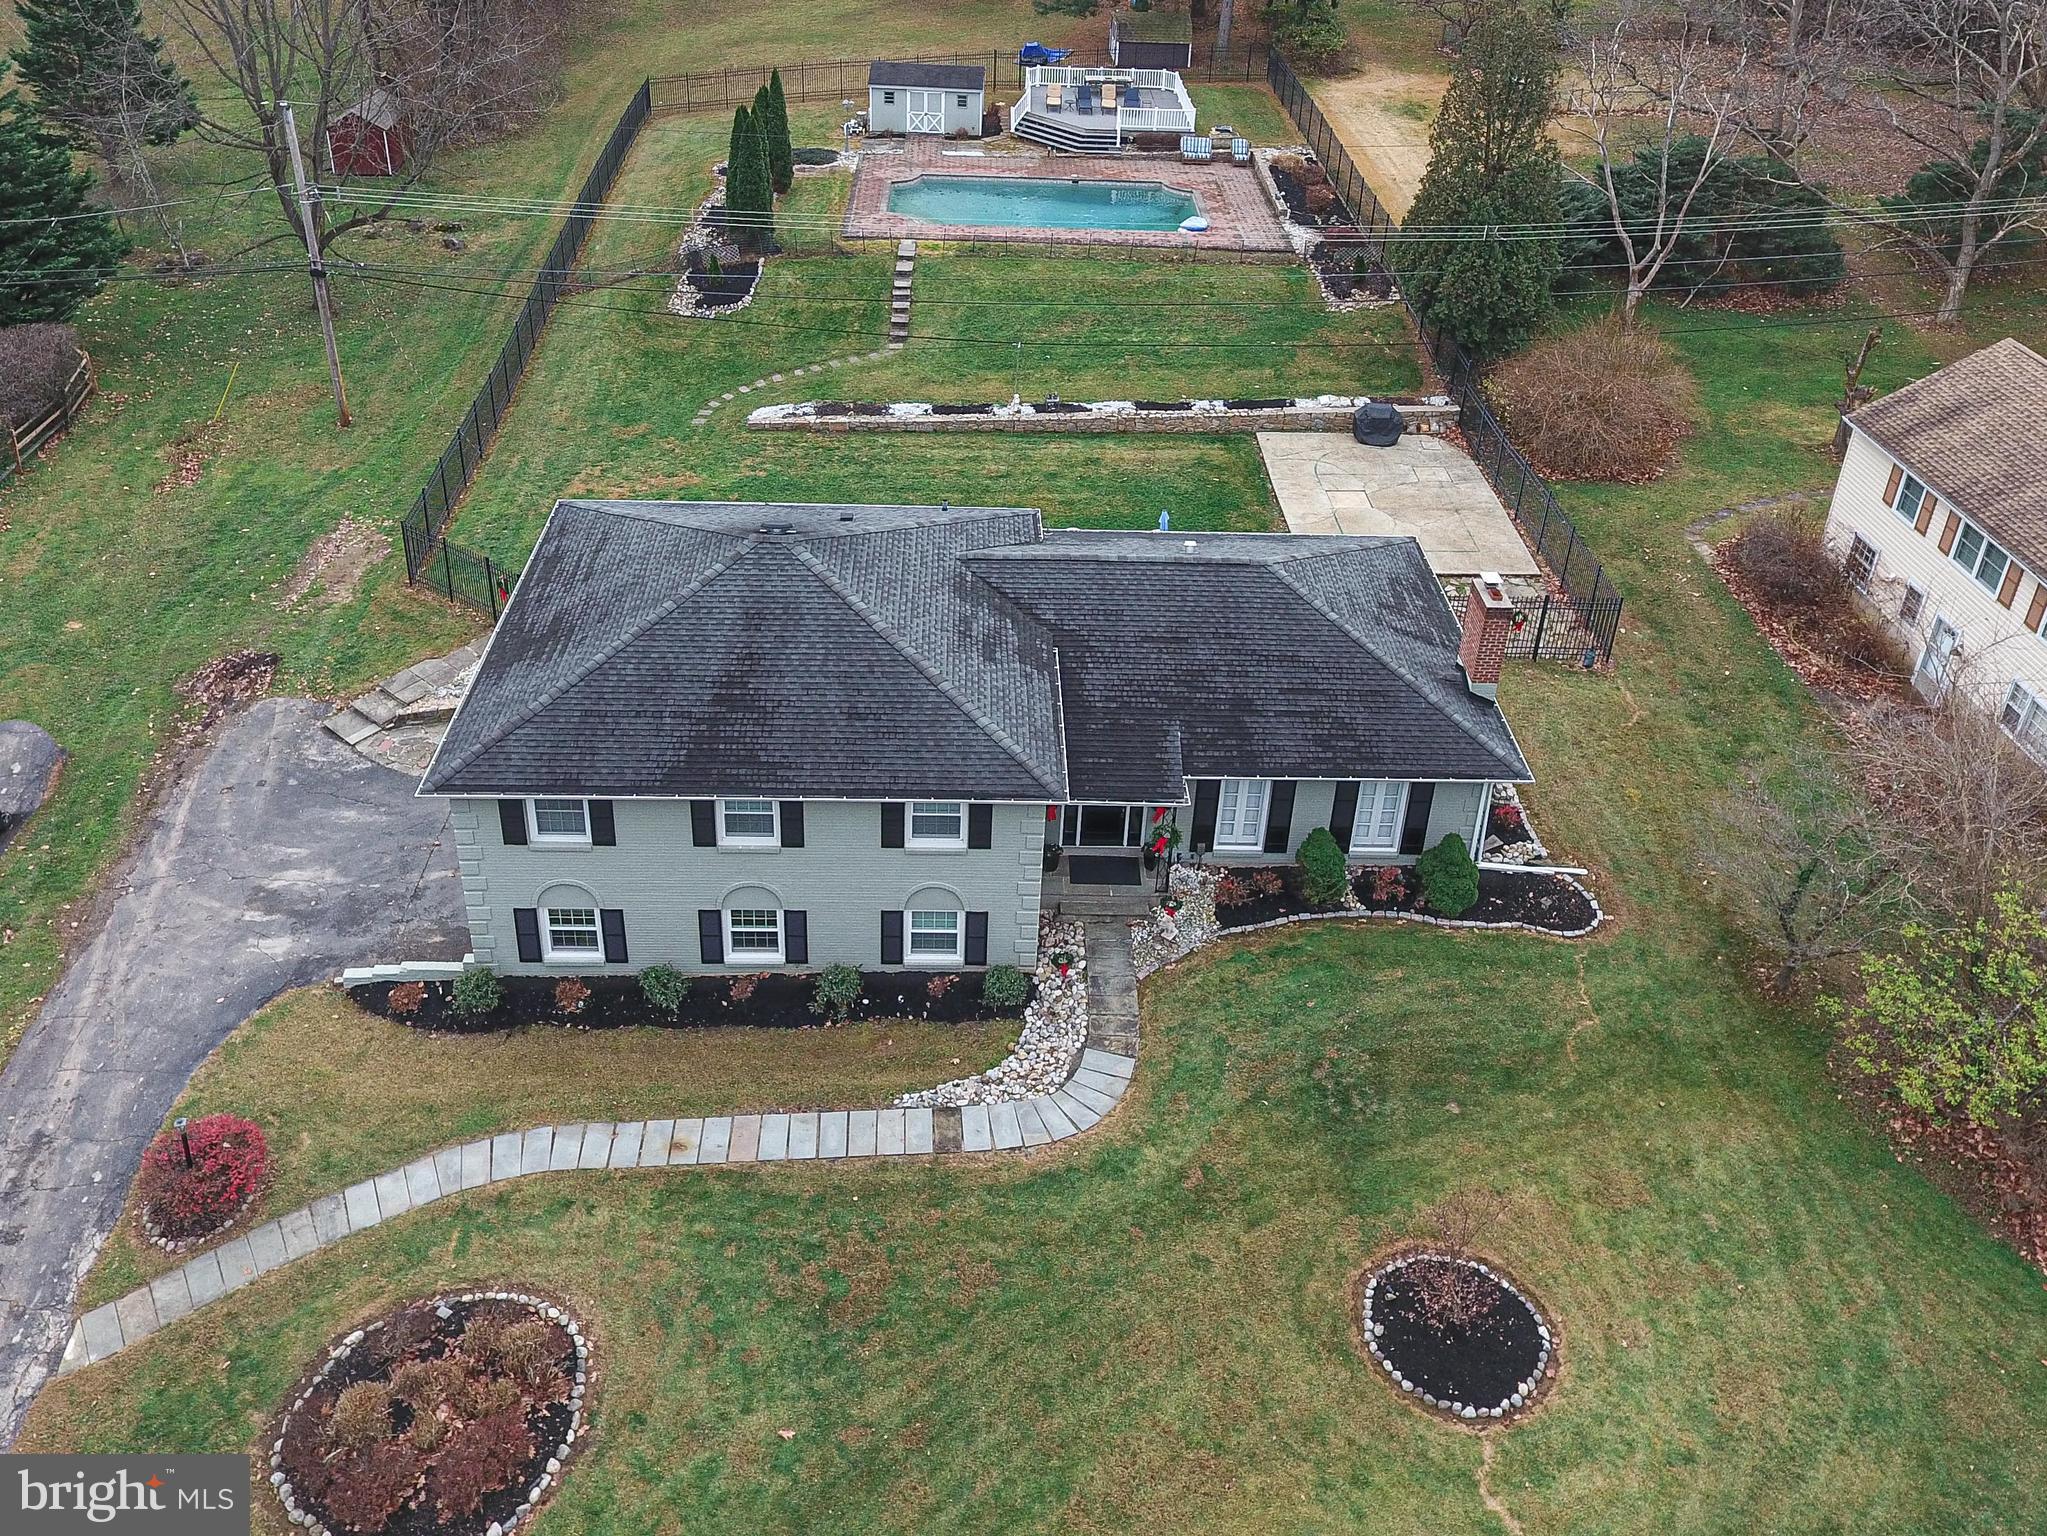 a aerial view of a house with yard